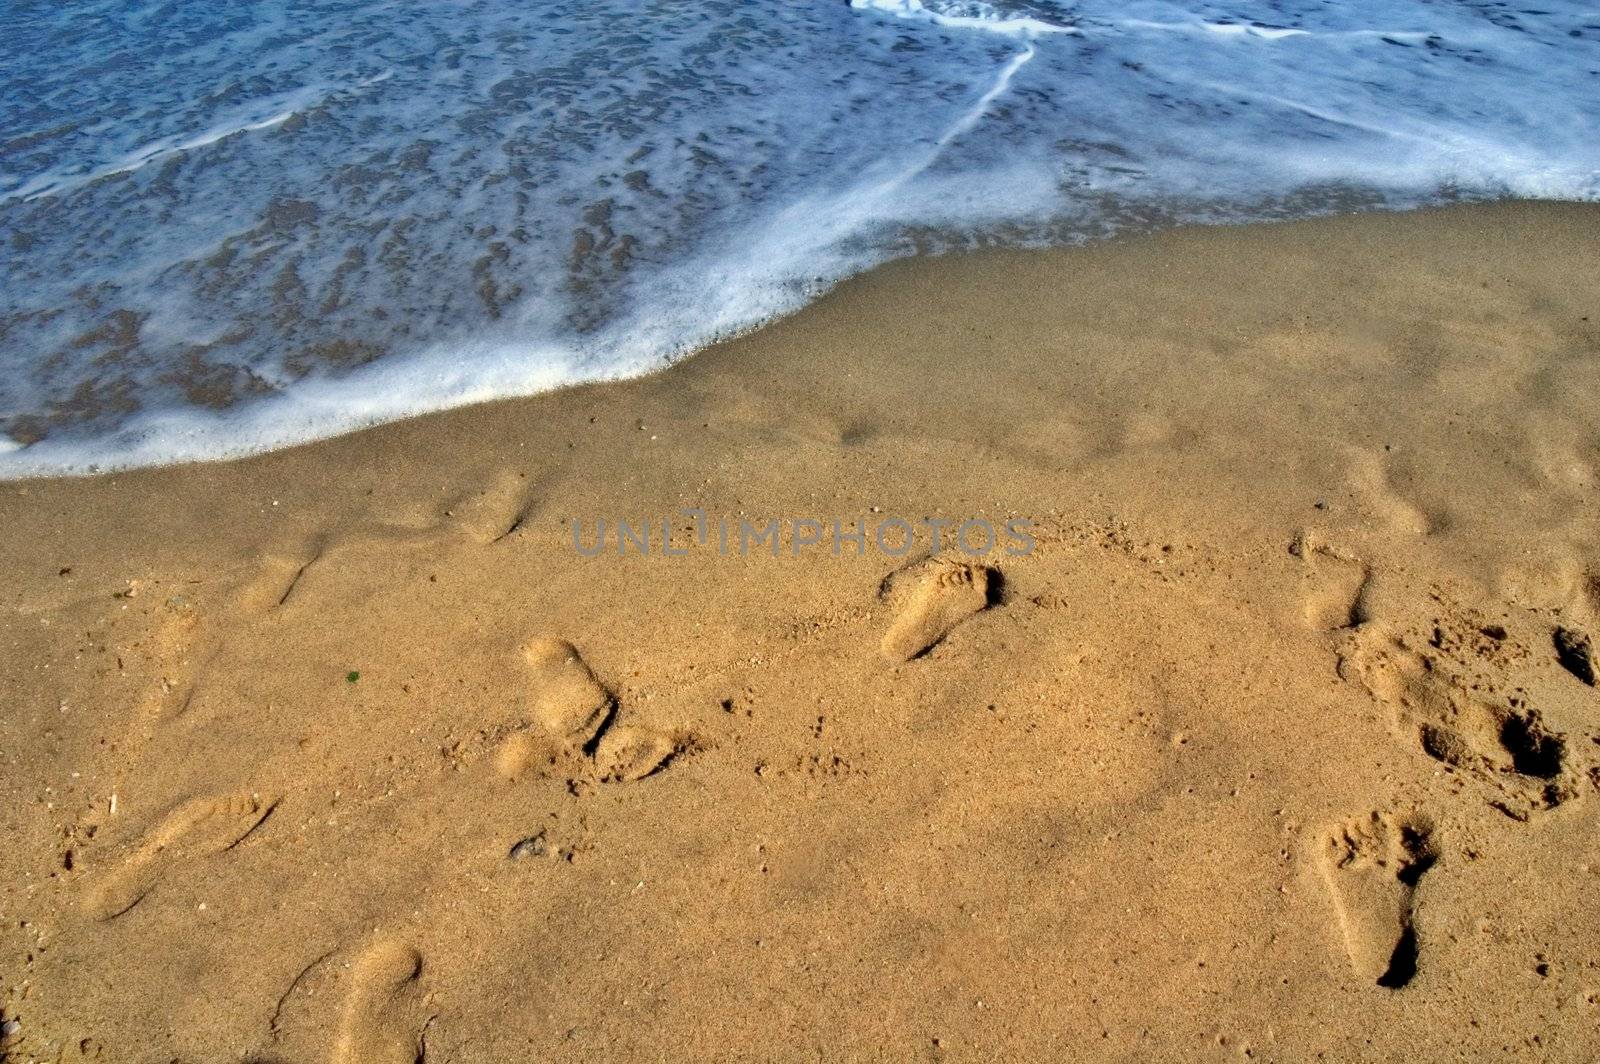 Footprints on the beach by sil